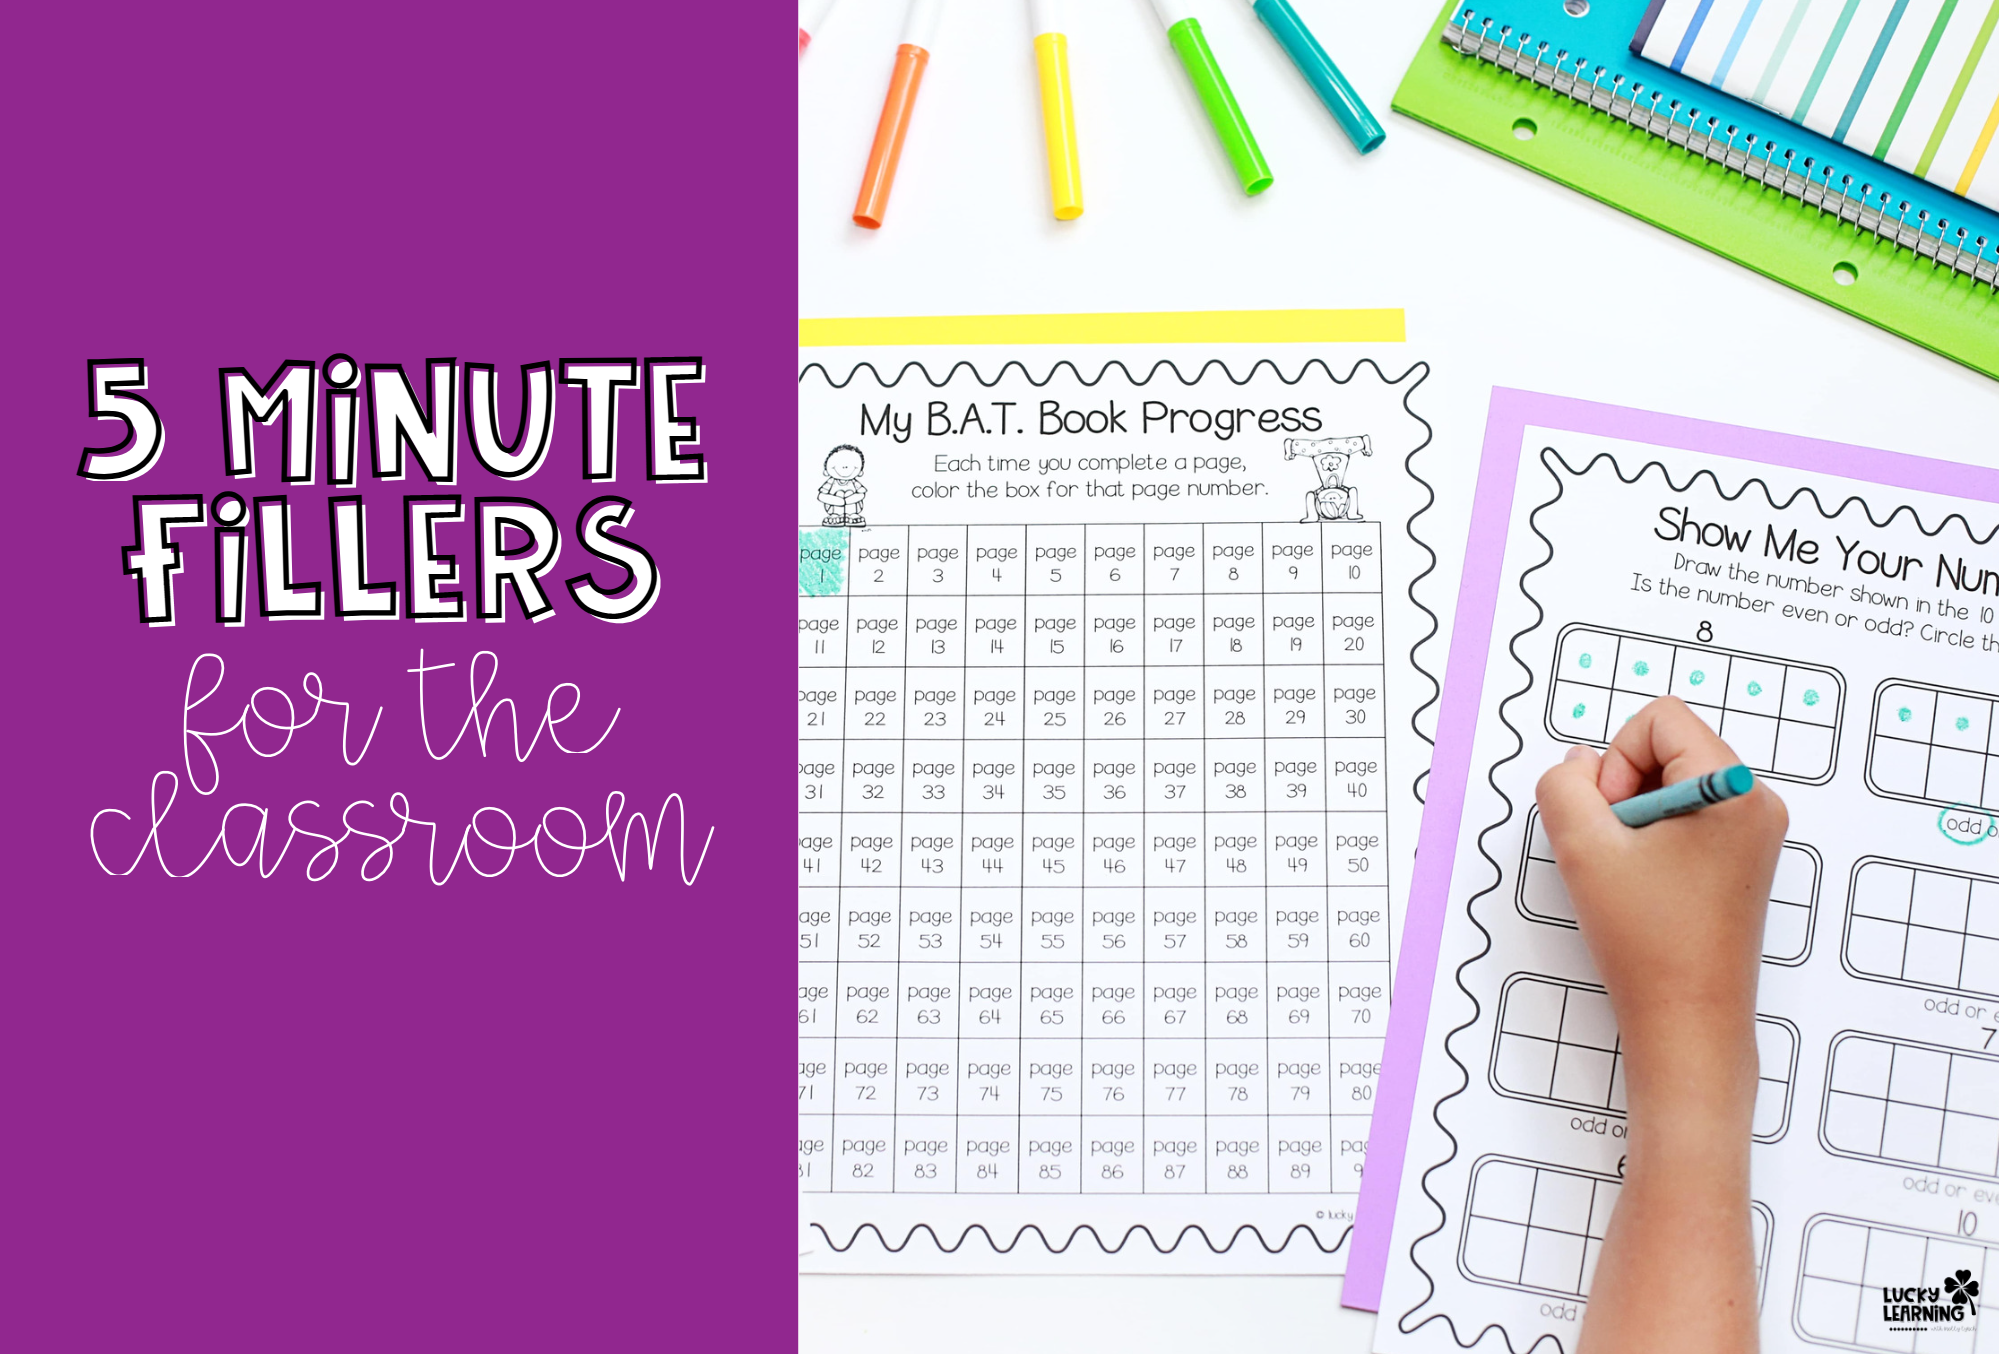 5 Minute Fillers for the Classroom | Lucky Learning with Molly Lynch